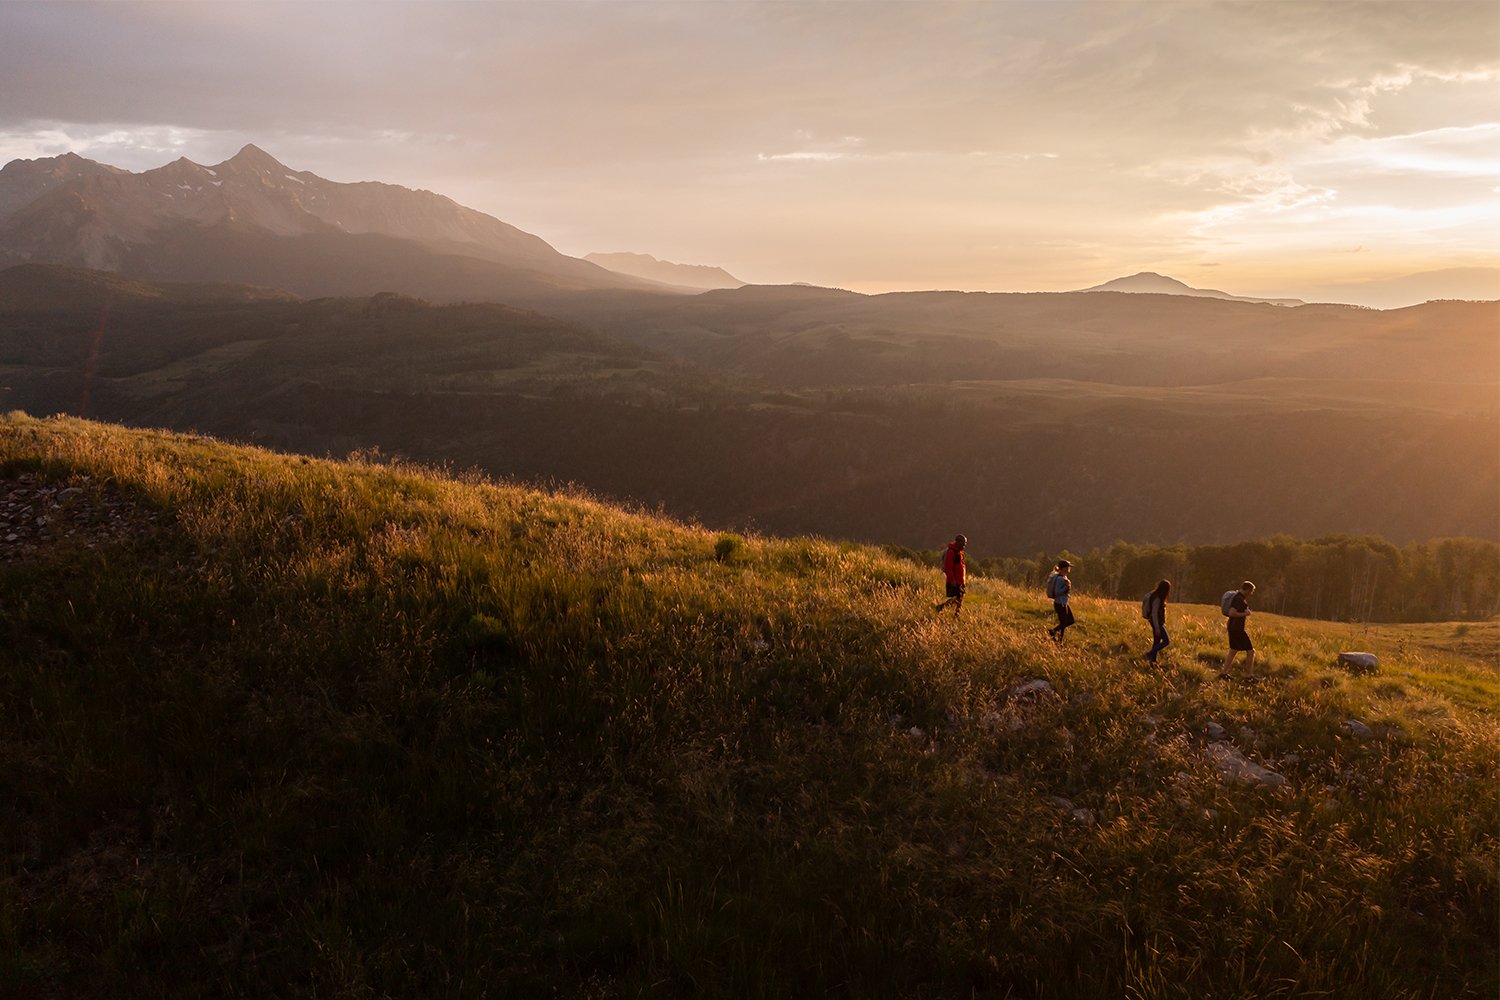 Four people hiking as part of the Reset trekking retreat in Telluride, Colorado, which just launched in May 2022